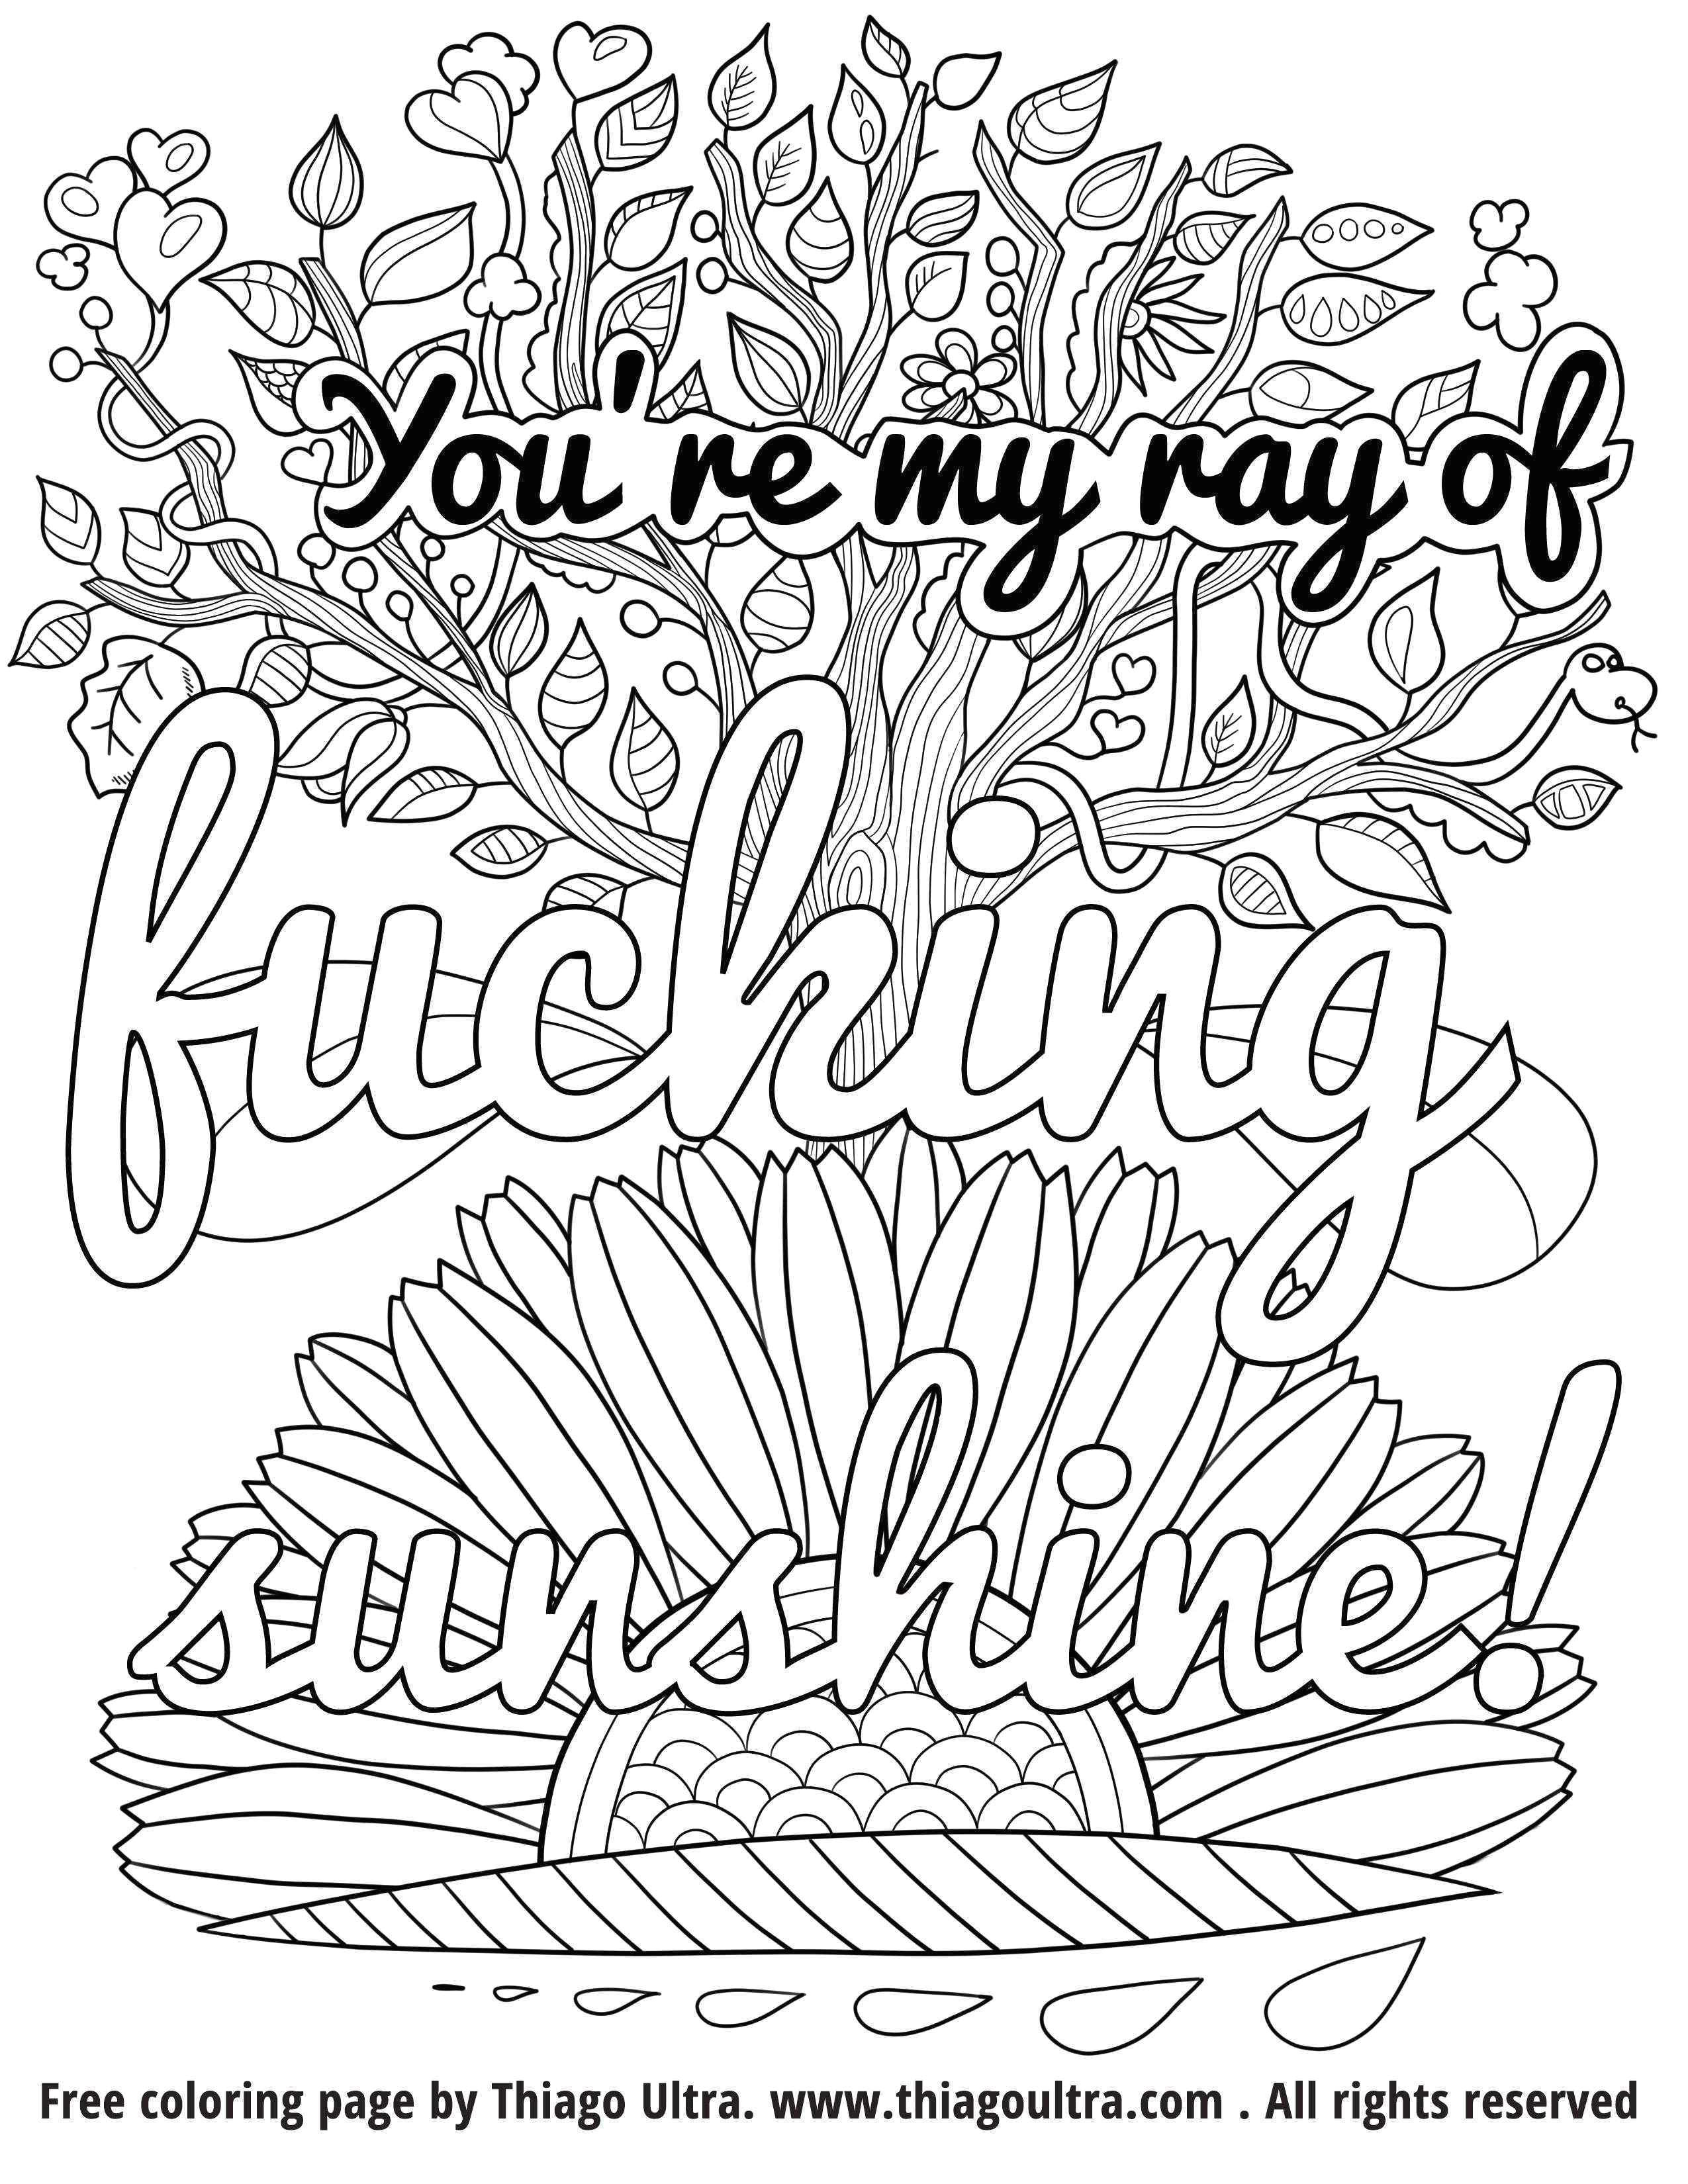 new swear word coloring book album imgur hair coloring pages new line coloring 0d archives free